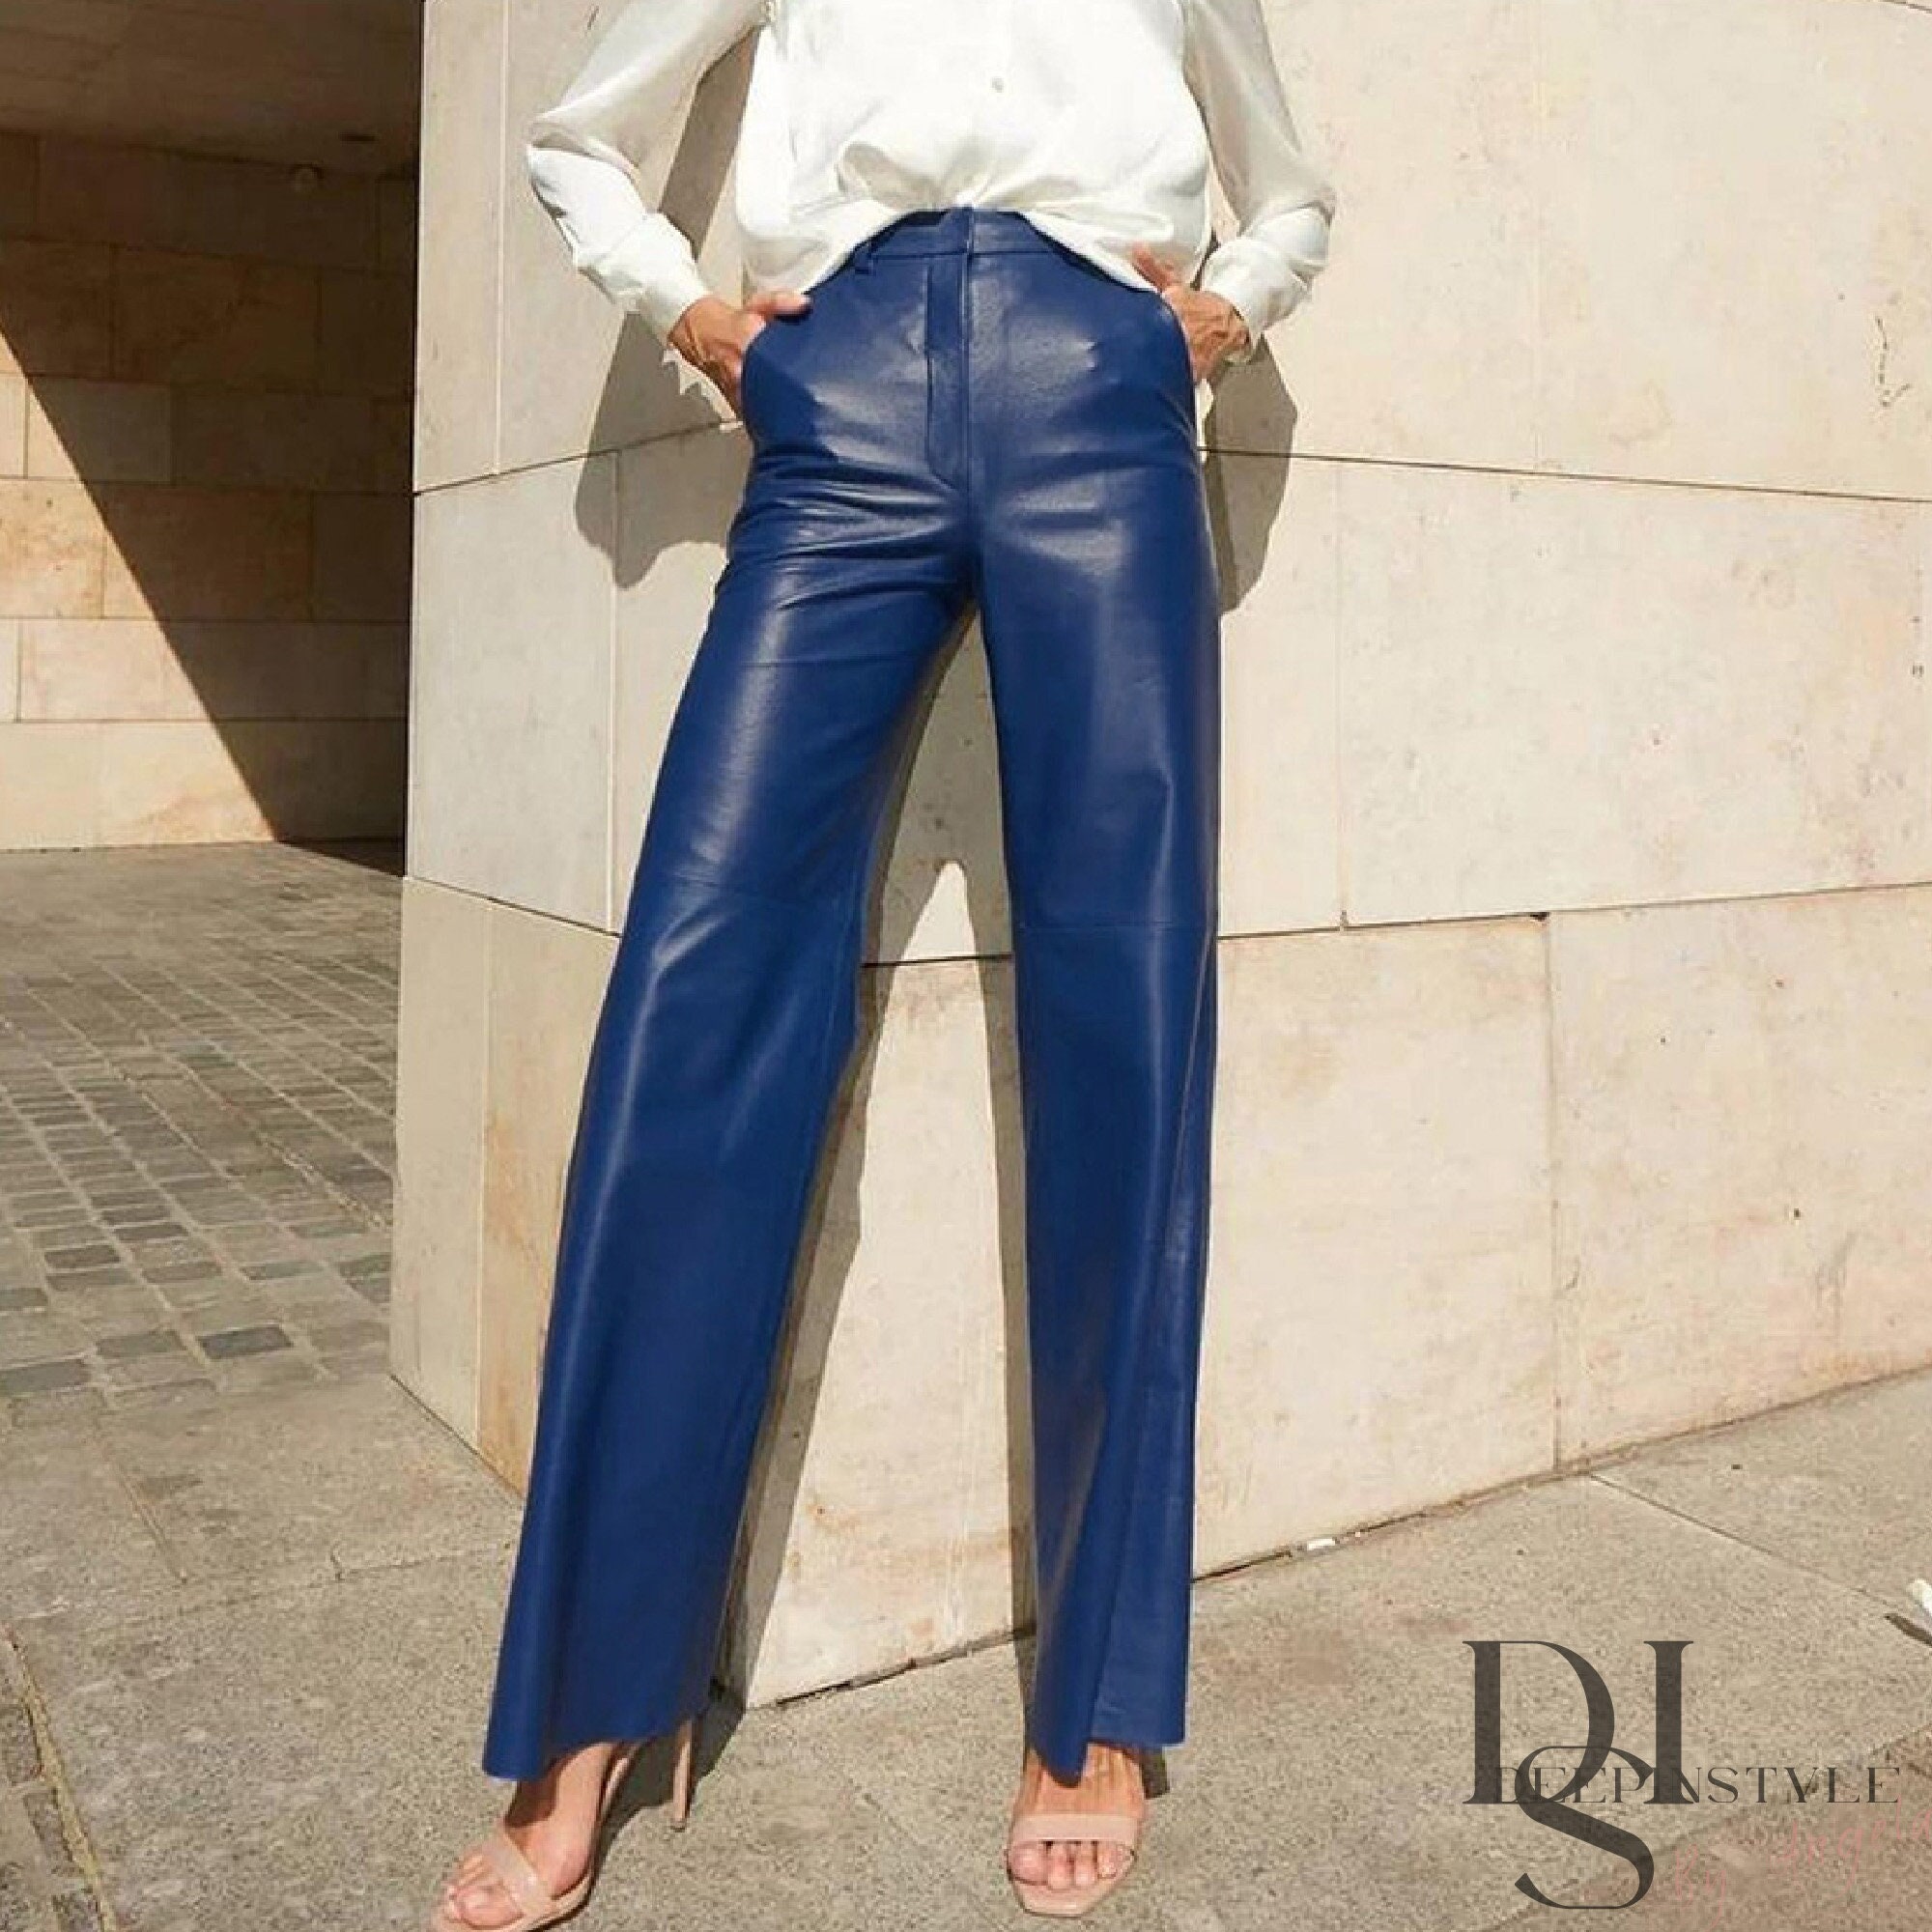 The Best Blue Leather Pants For Women From Flares To Straight Leg